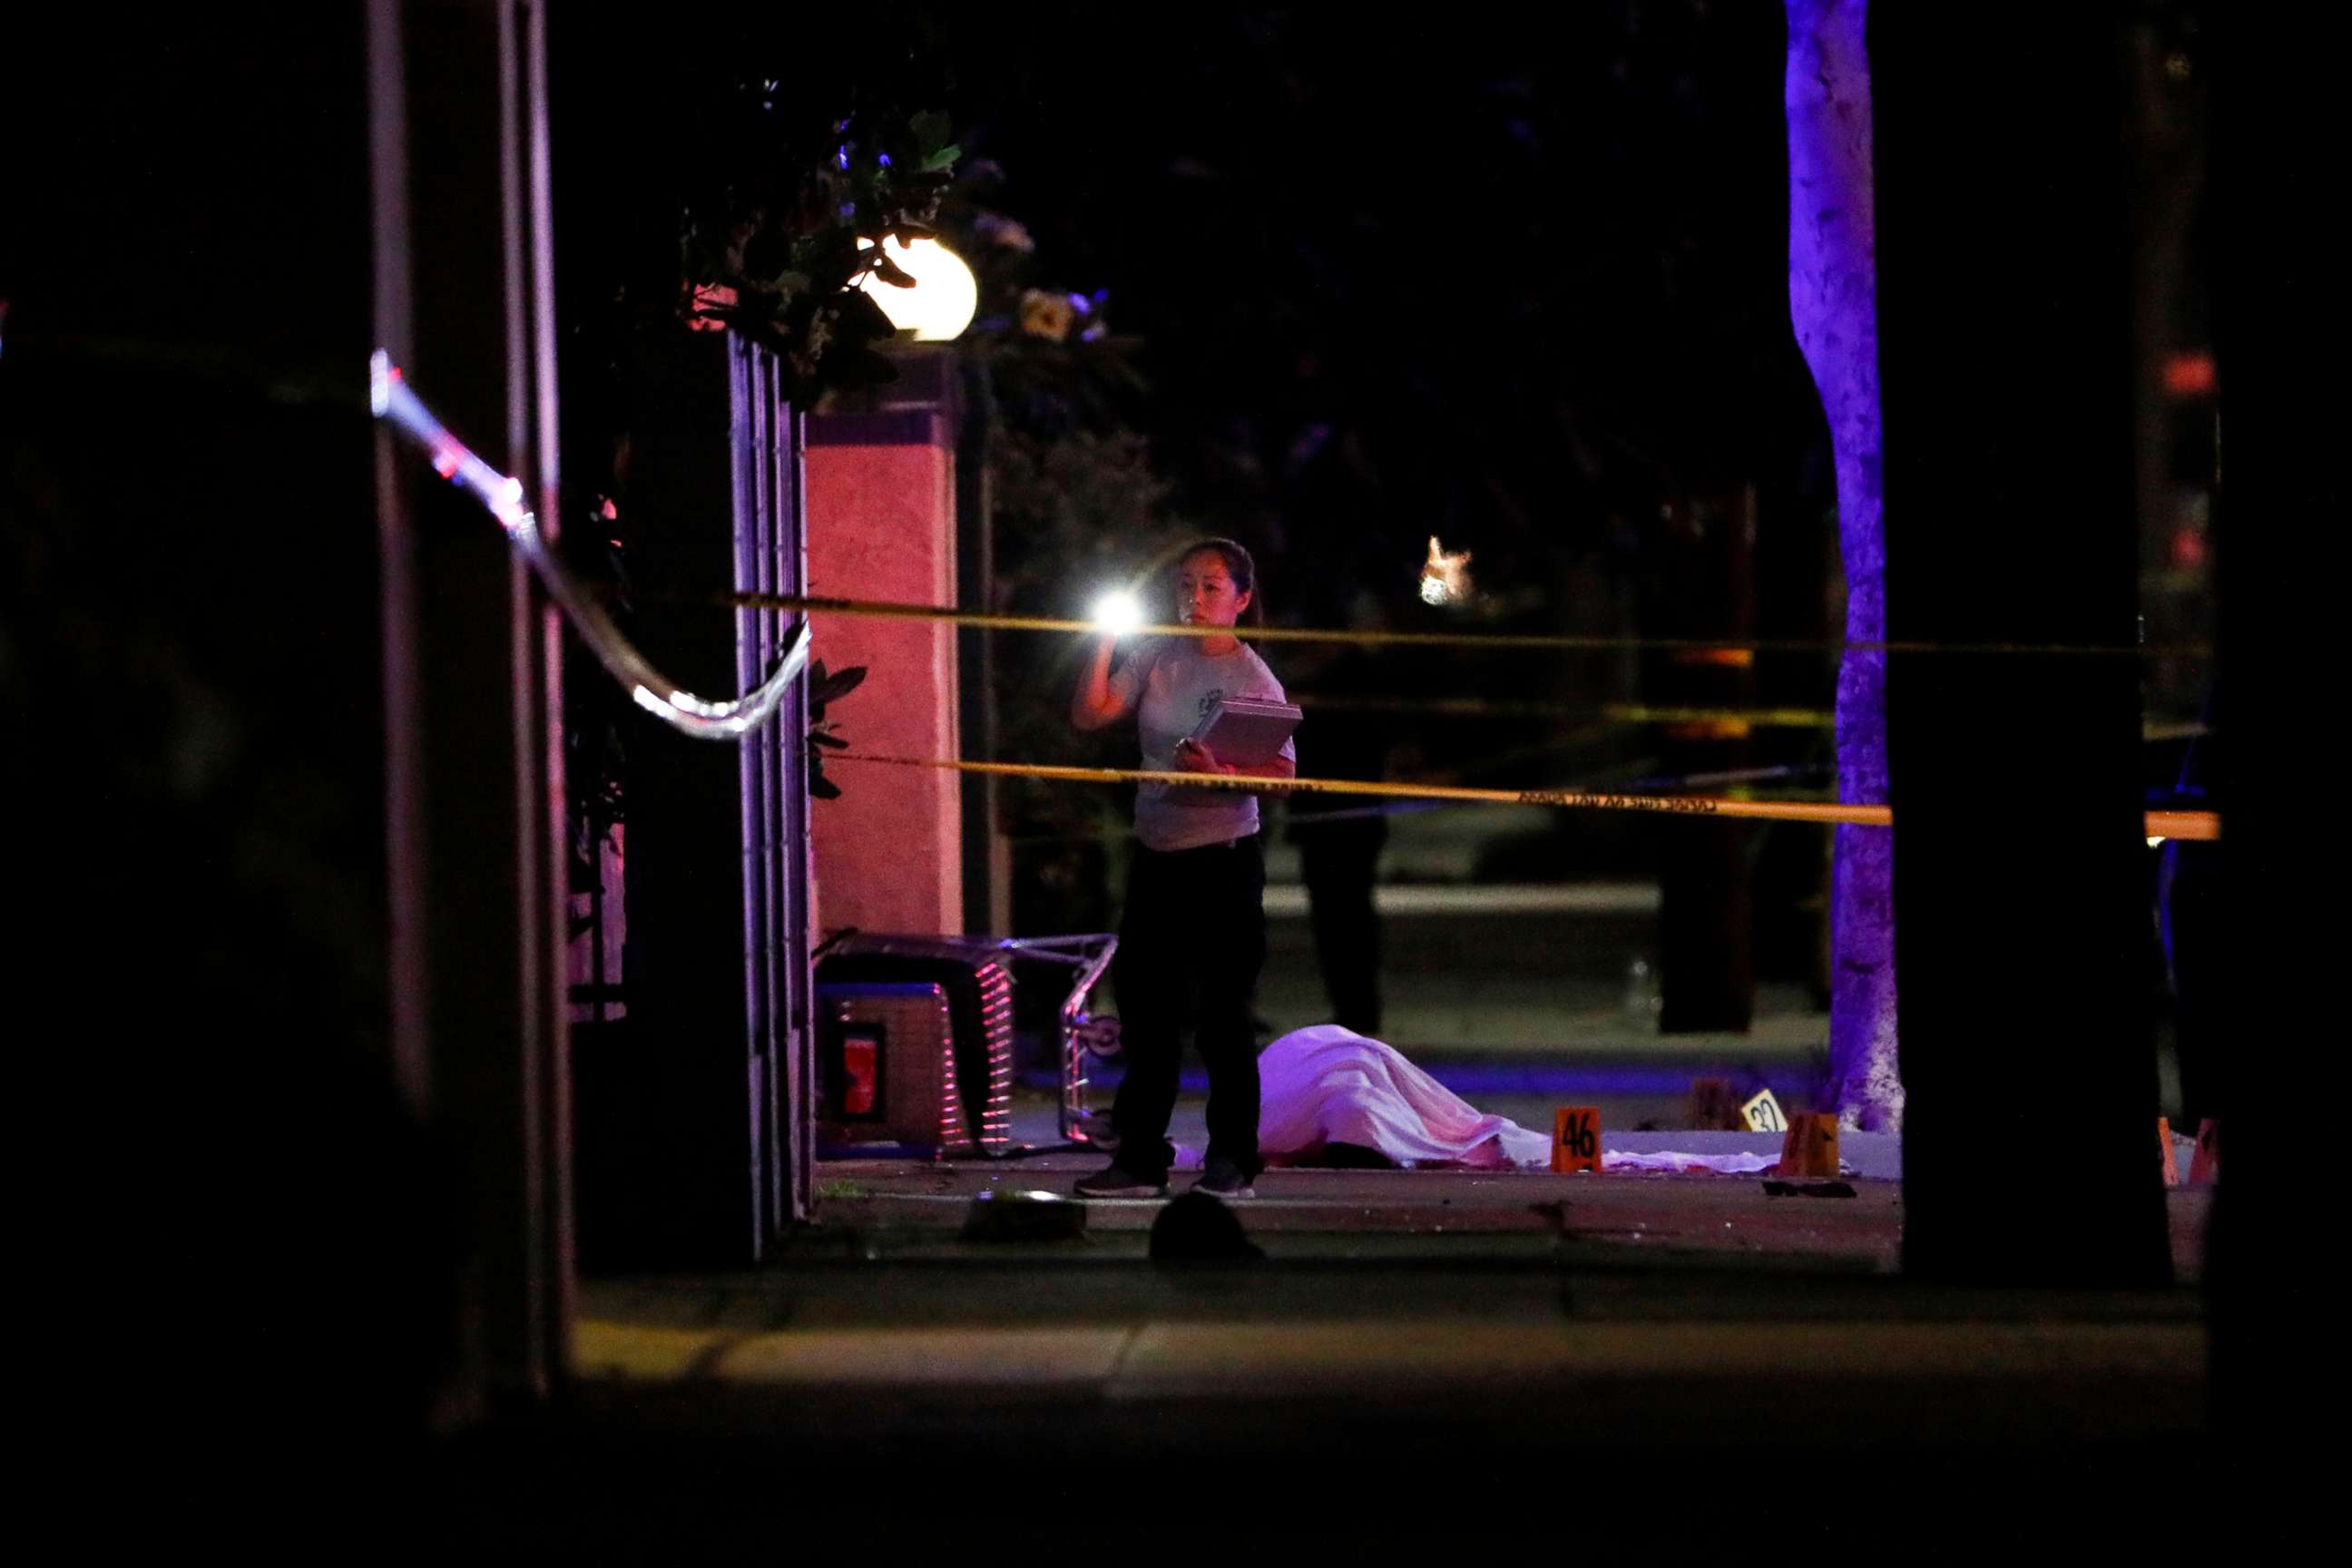 PHOTO: Investigators at a scene after a shooting on June 14, 2022 in El Monte, Calif.